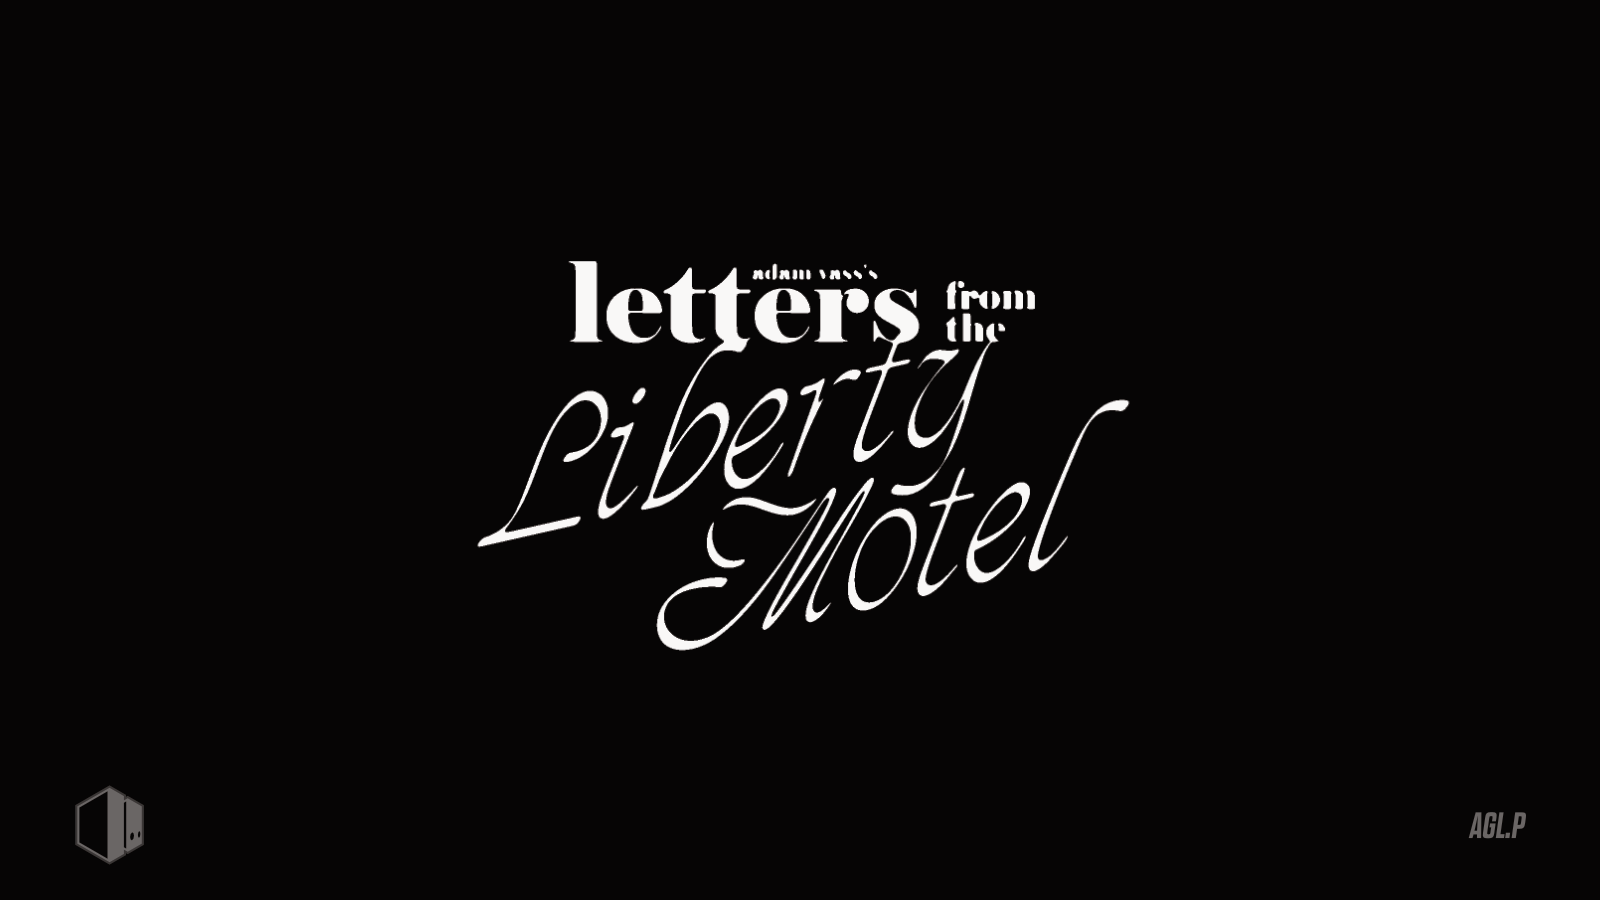 Letters from the Liberty Motel | World Champ Game Co. | Adam Vass